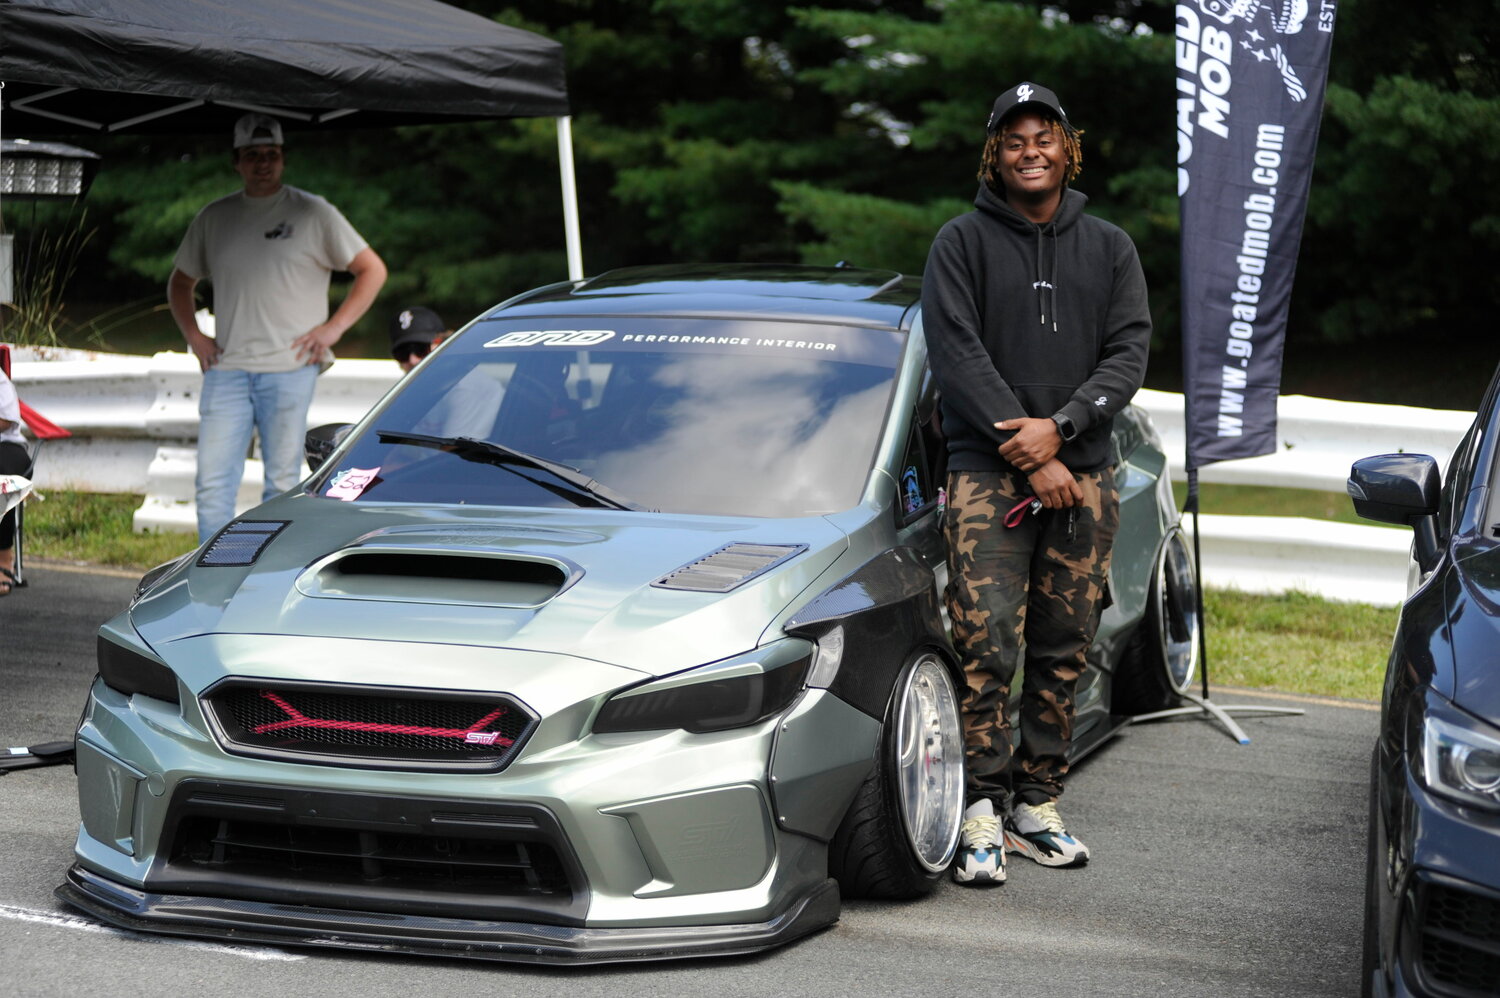 Denzell “DZ” Smallwood took home one of the Top 10 awards with his 2015 Subaru STI, which with all the custom carbon fiber additions, resembles a road-going Millennium Falcon of “Star Wars” fame.